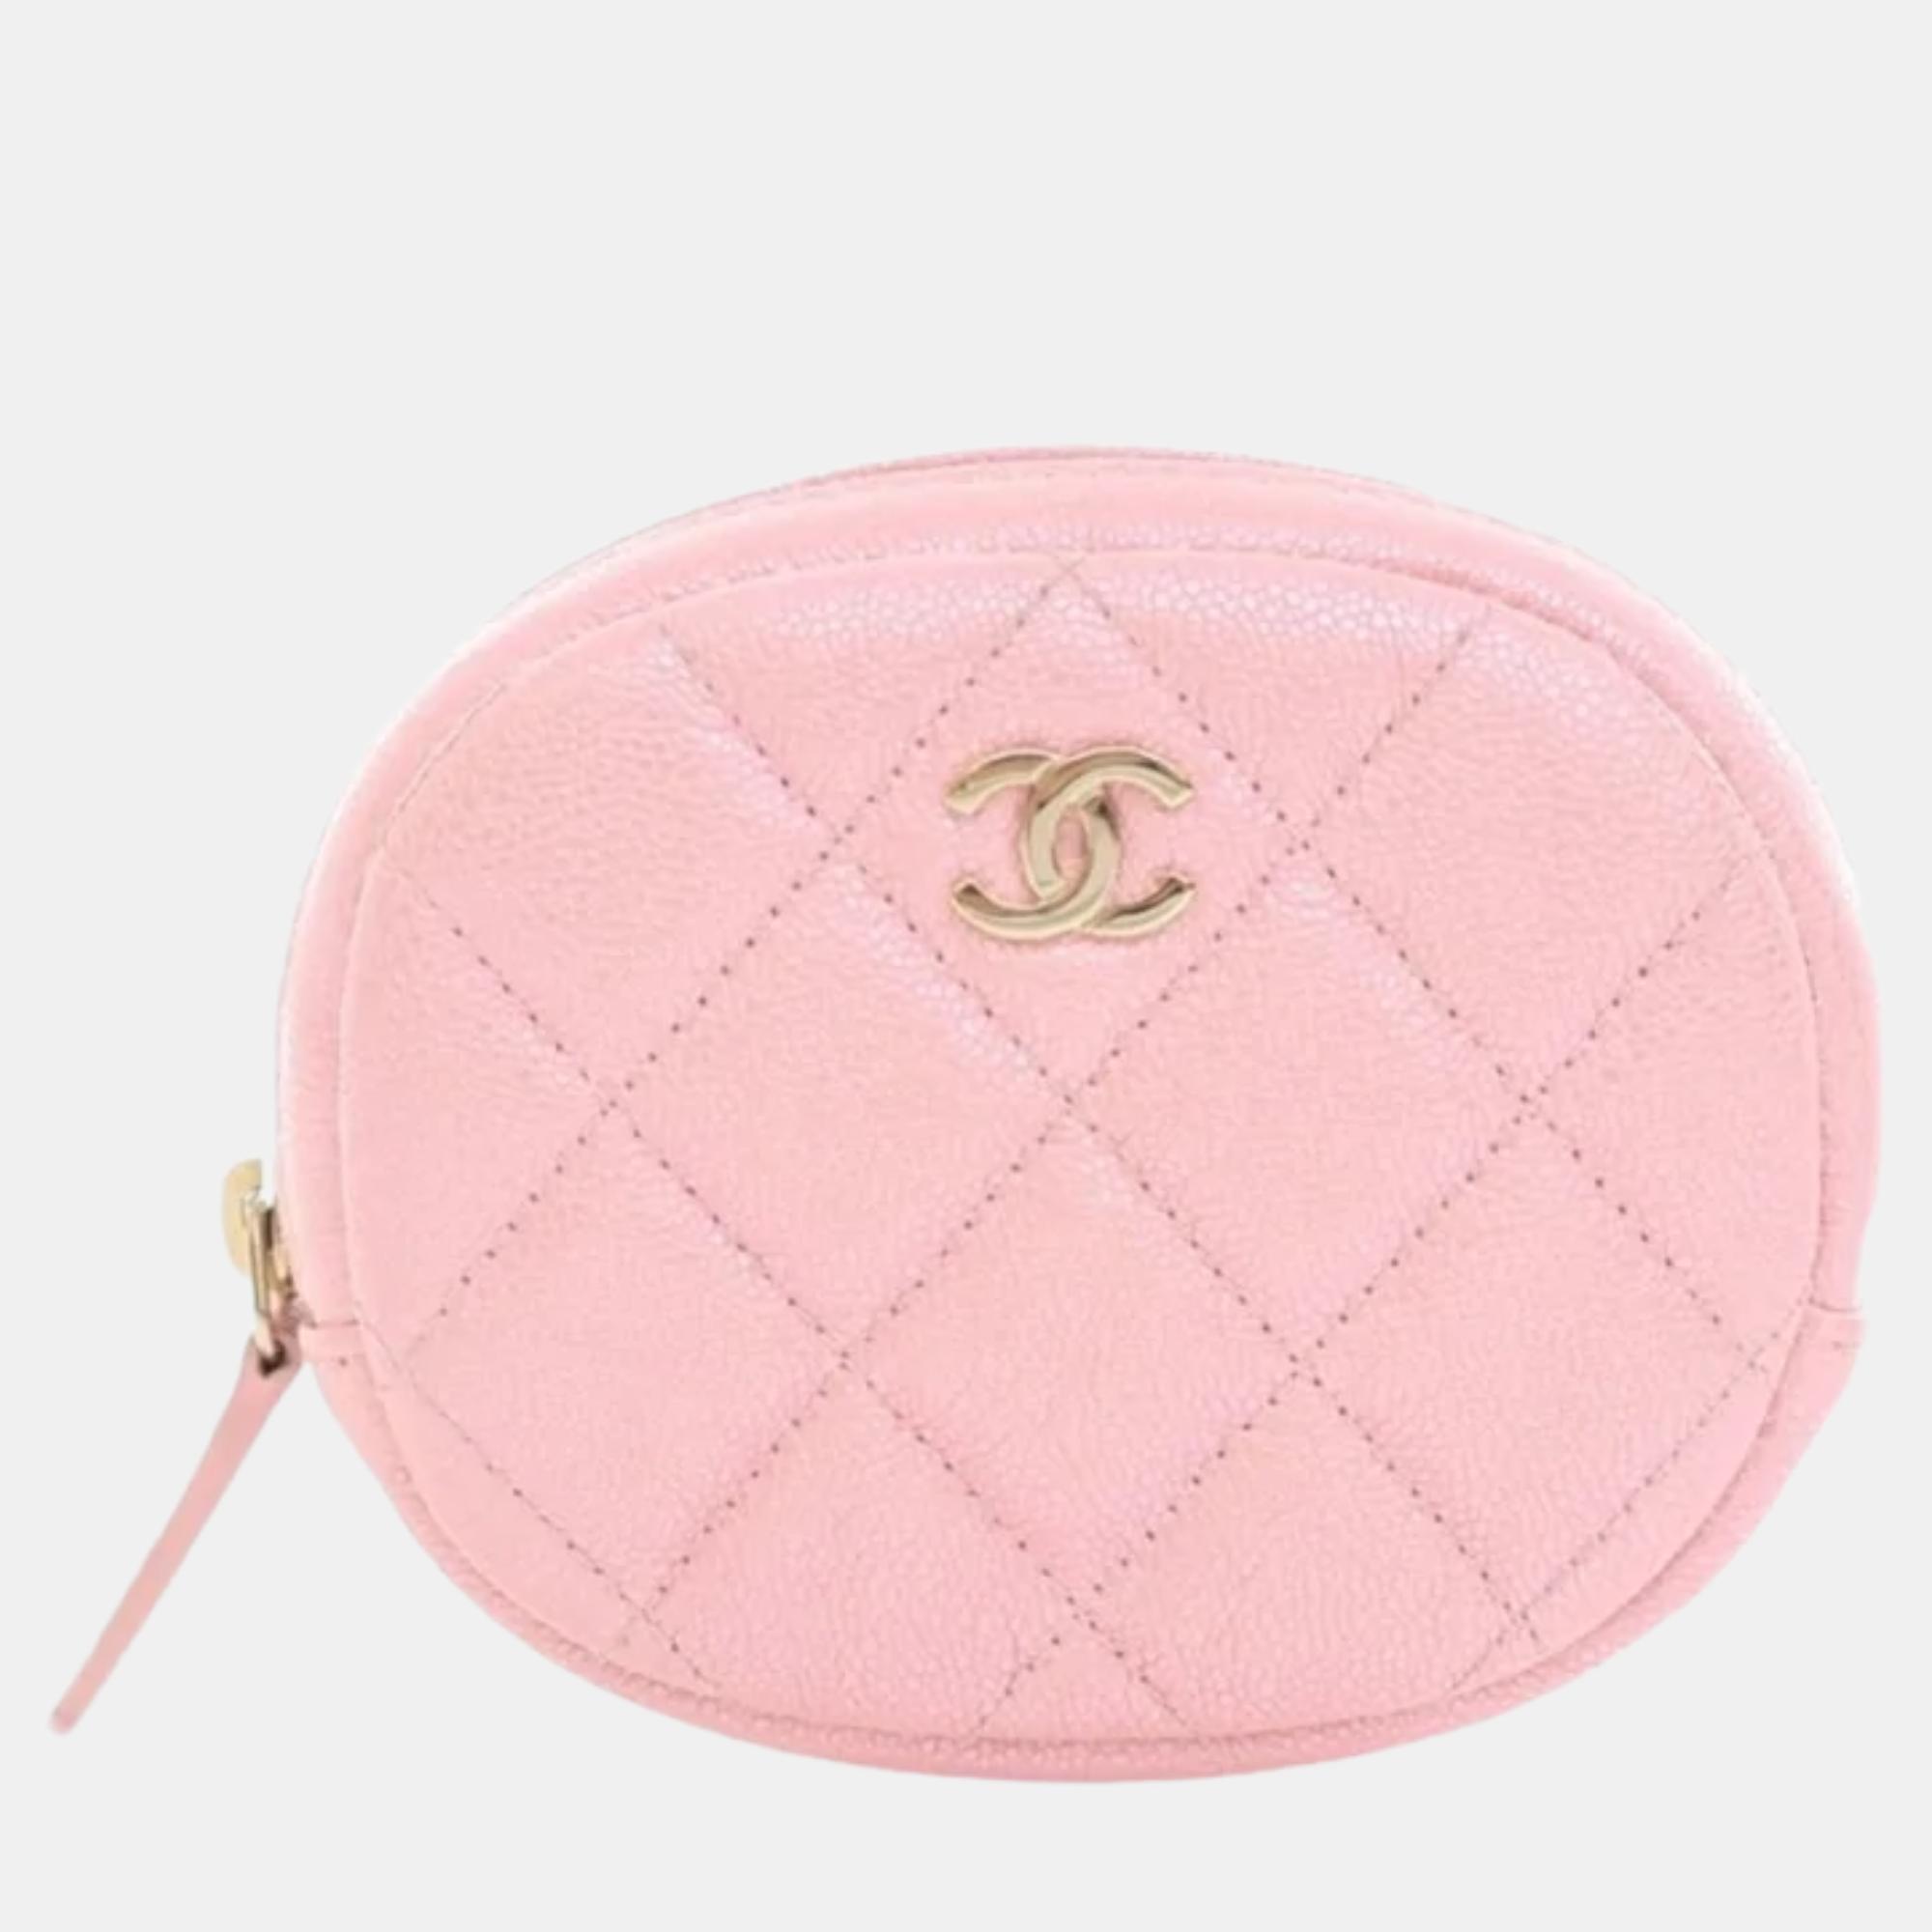 Chanel rose pink iridescent caviar quilted zip around classic coin purse